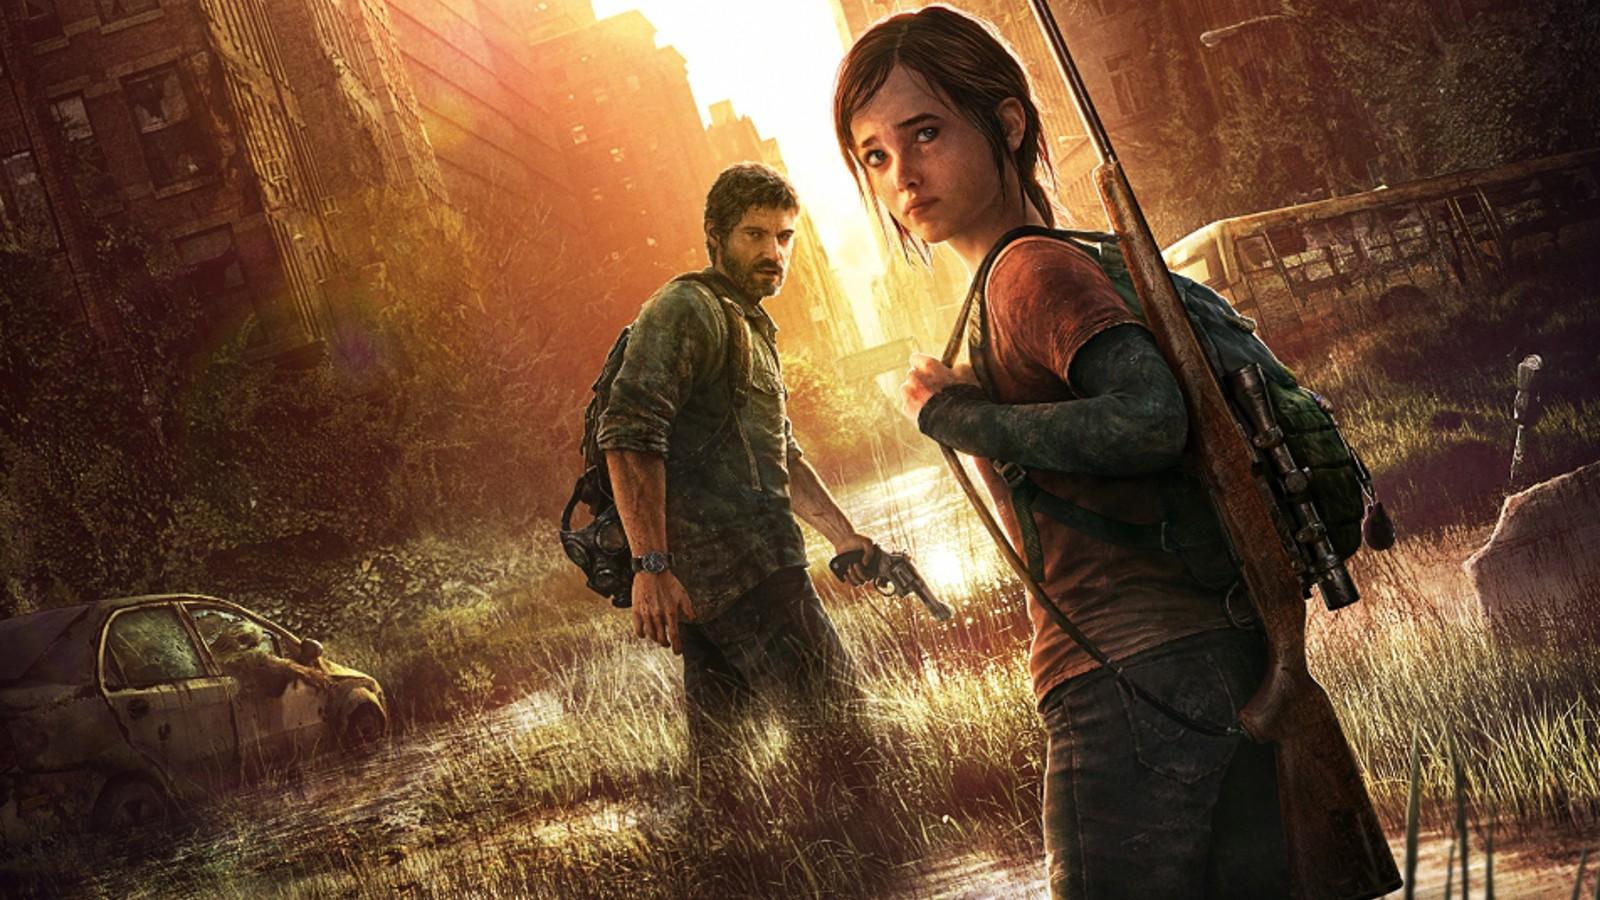 An image of Joel and Ellie in The Last of Us.